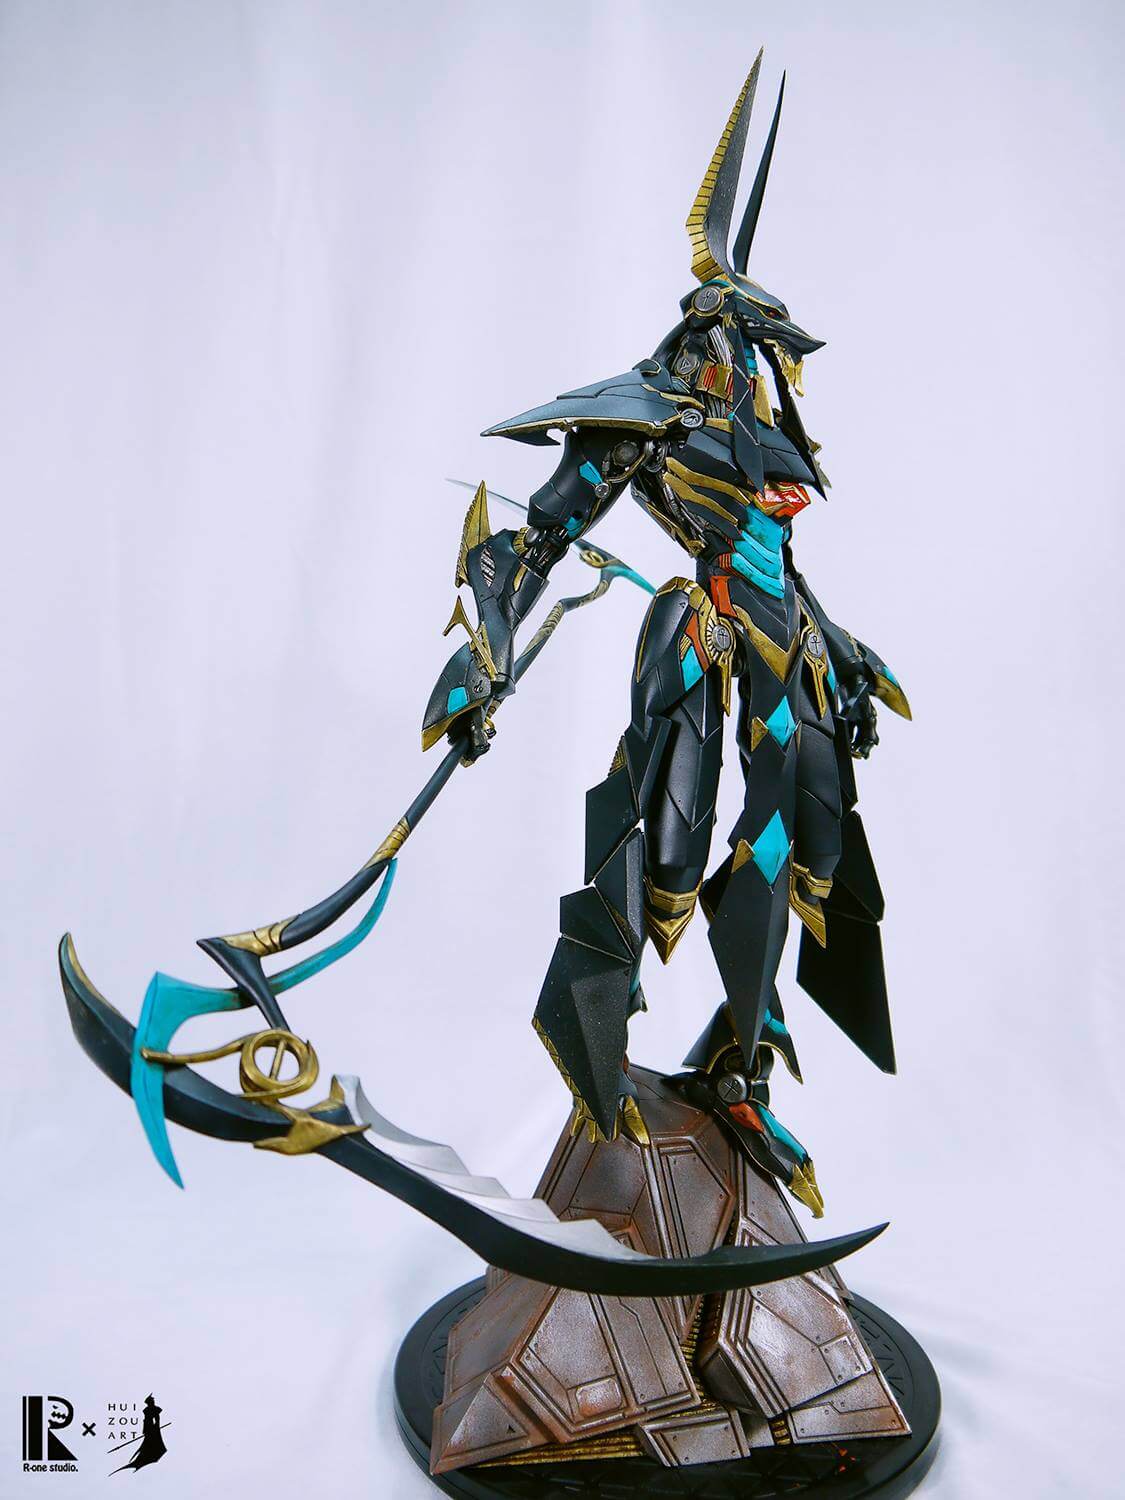 Undead Trial Anubis By Art Hui The Zou x Studio - R-One Chronicle Toy